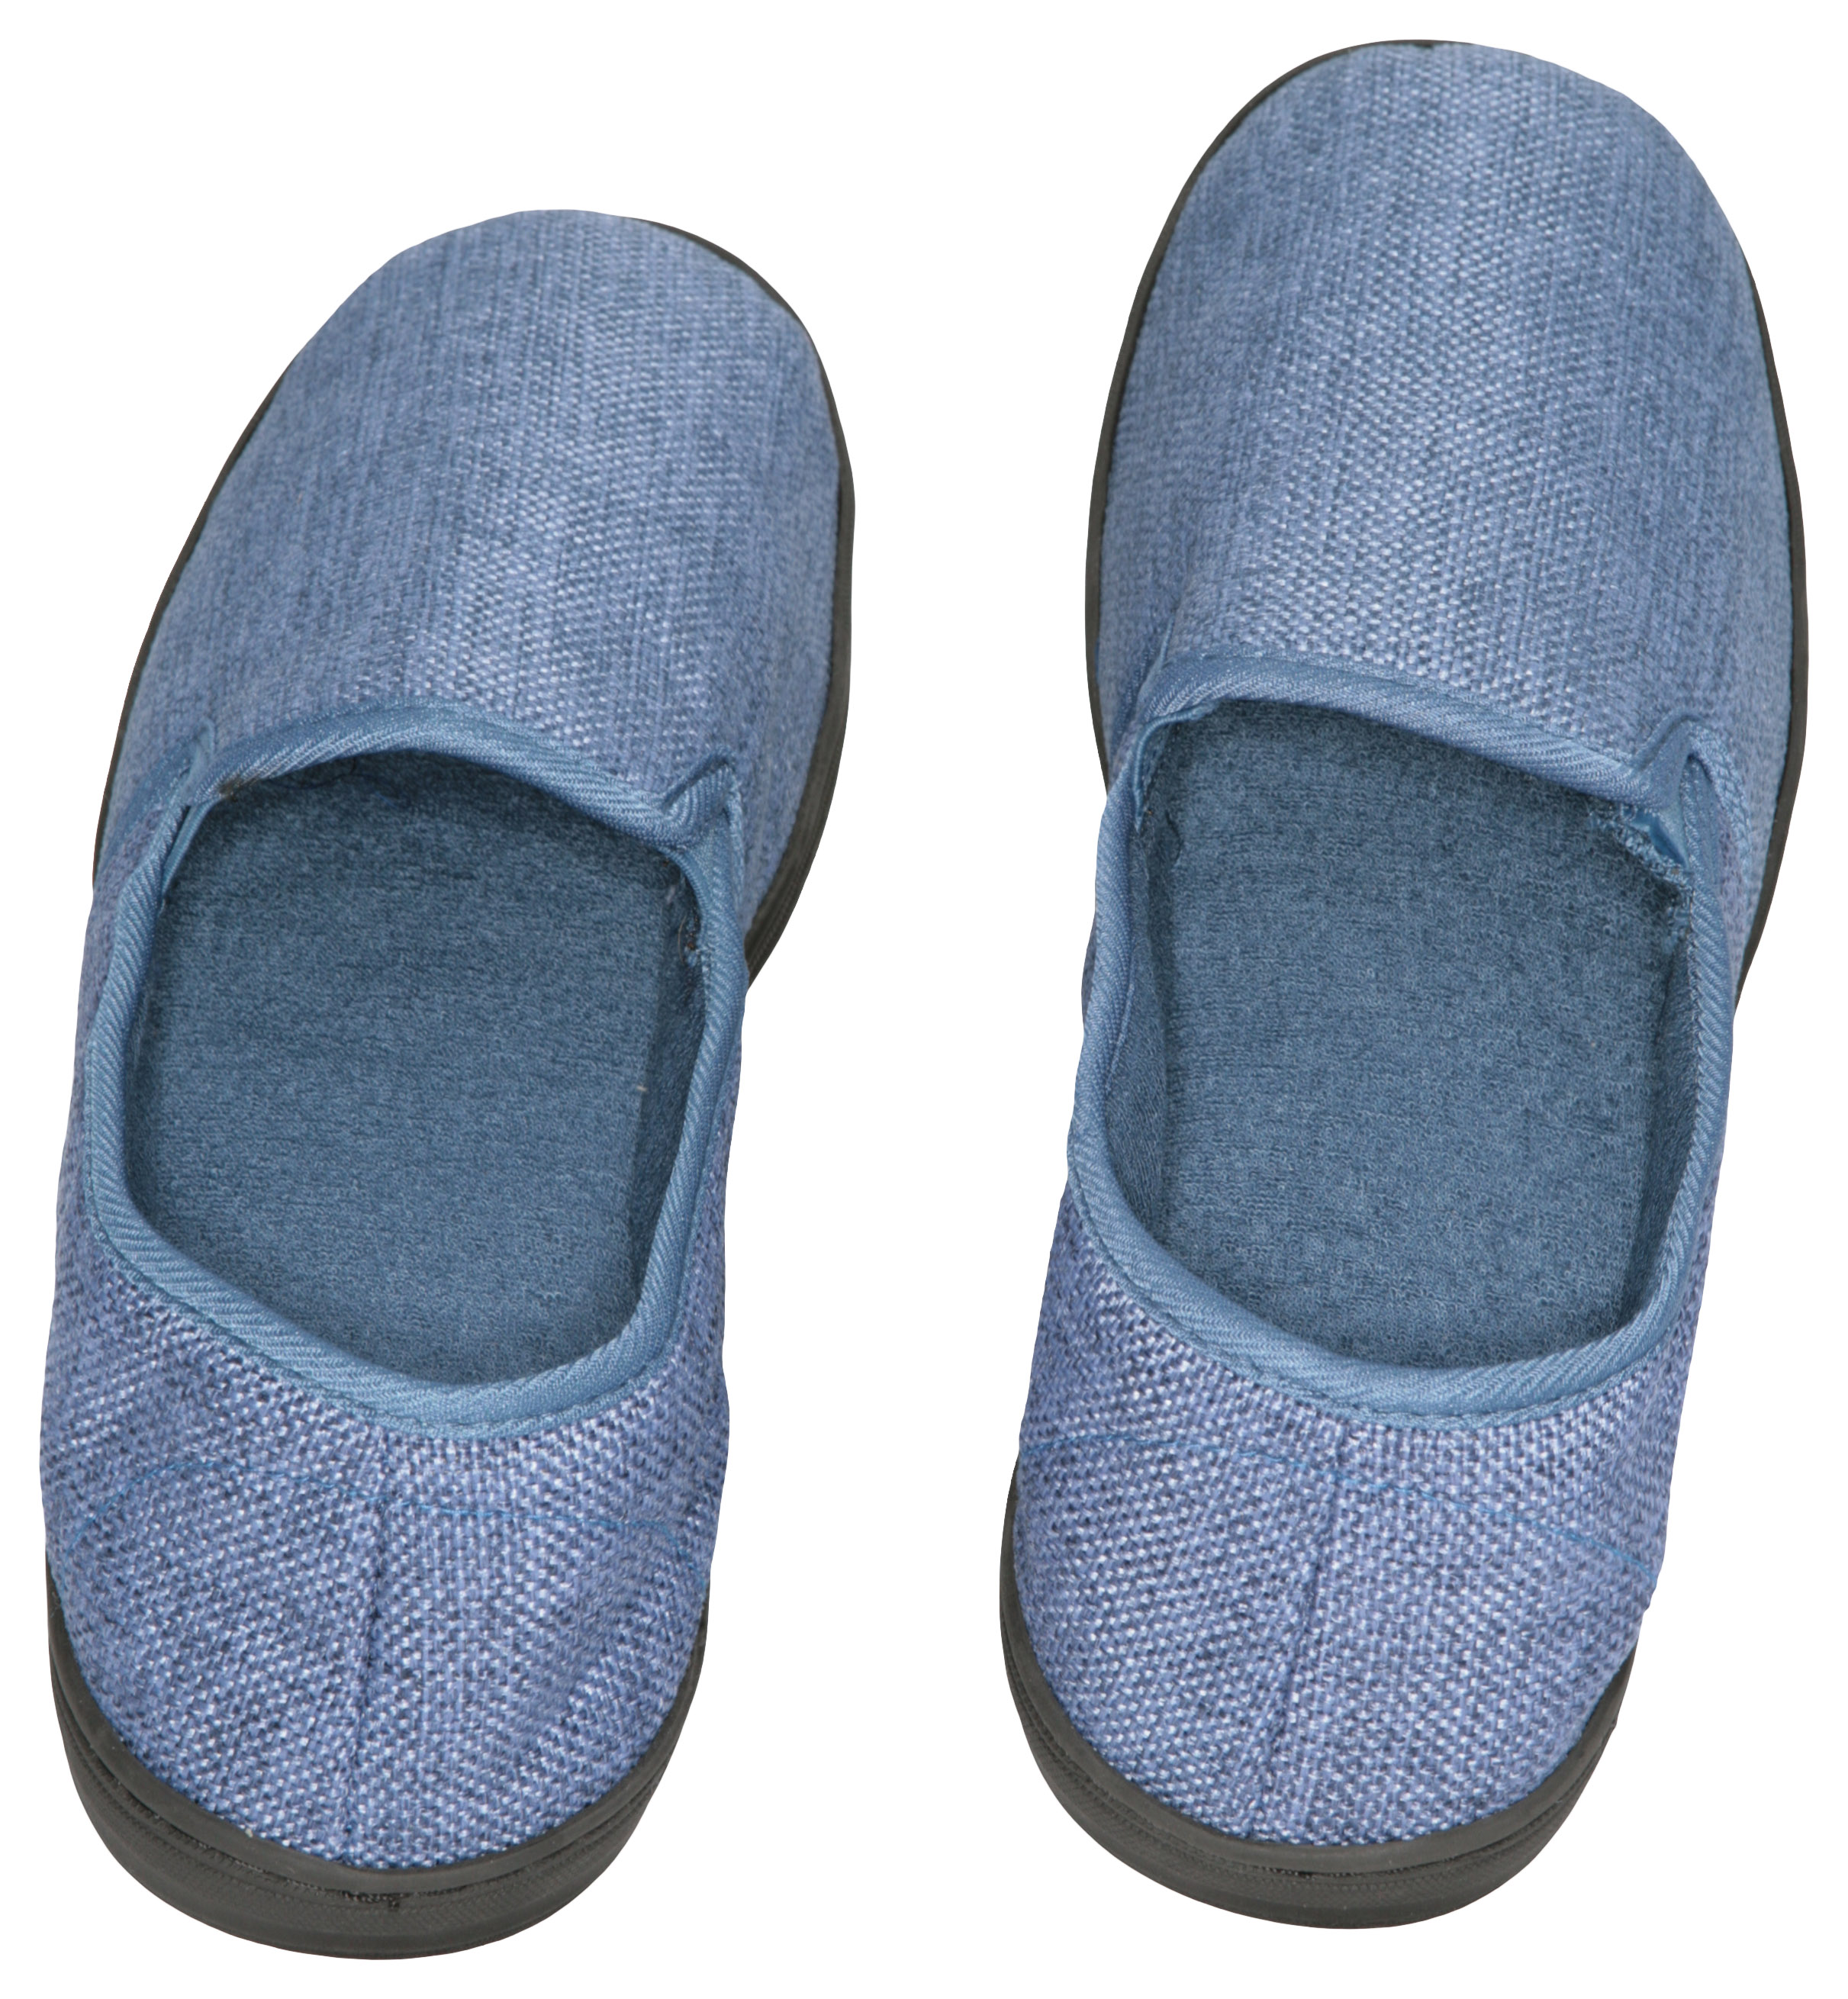 Deluxe Comfort Men's Memory Foam Slipper, Size 11-12 – Soft Linen 120D SBR Insole and Rubber Outsole – Pure Suede Shoes – Non-Marking Sole – Men's Slippers, Blue - image 4 of 5